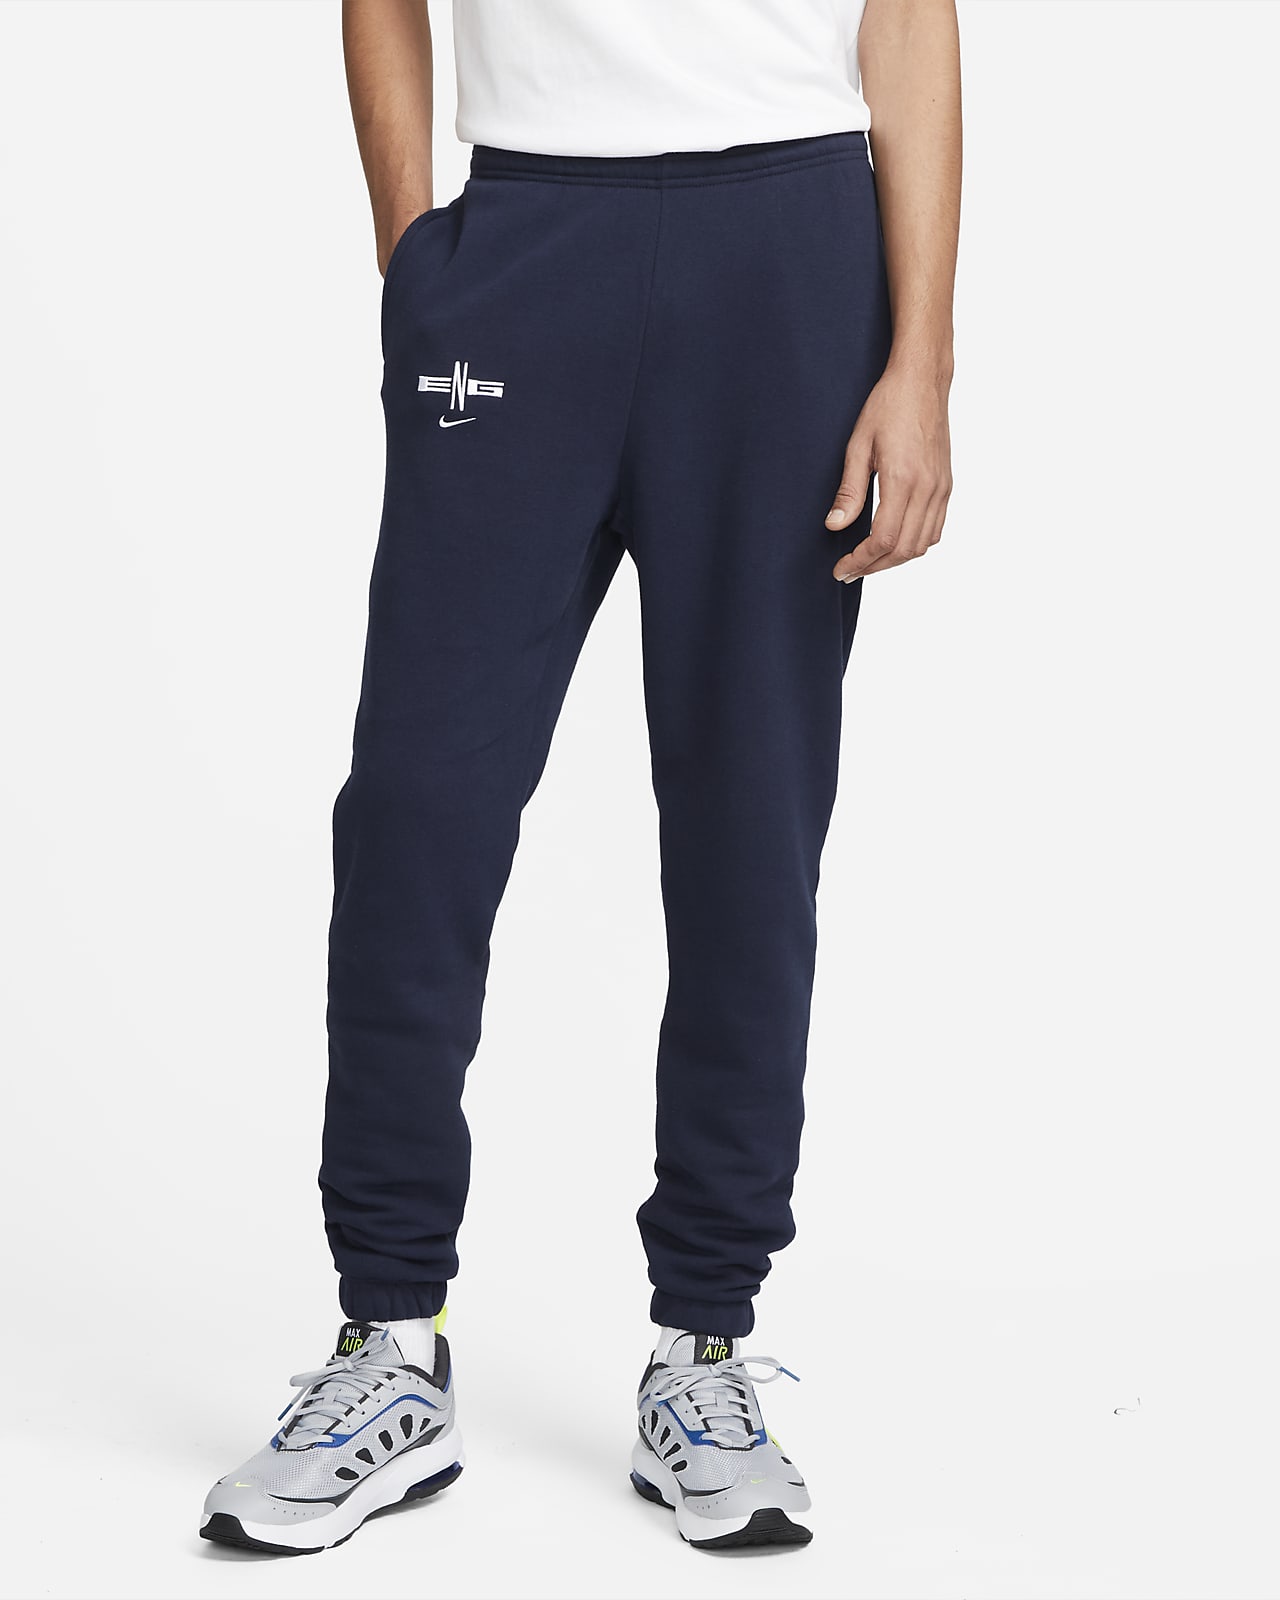 Adidas Jogging Track Pant - Get Best Price from Manufacturers & Suppliers  in India